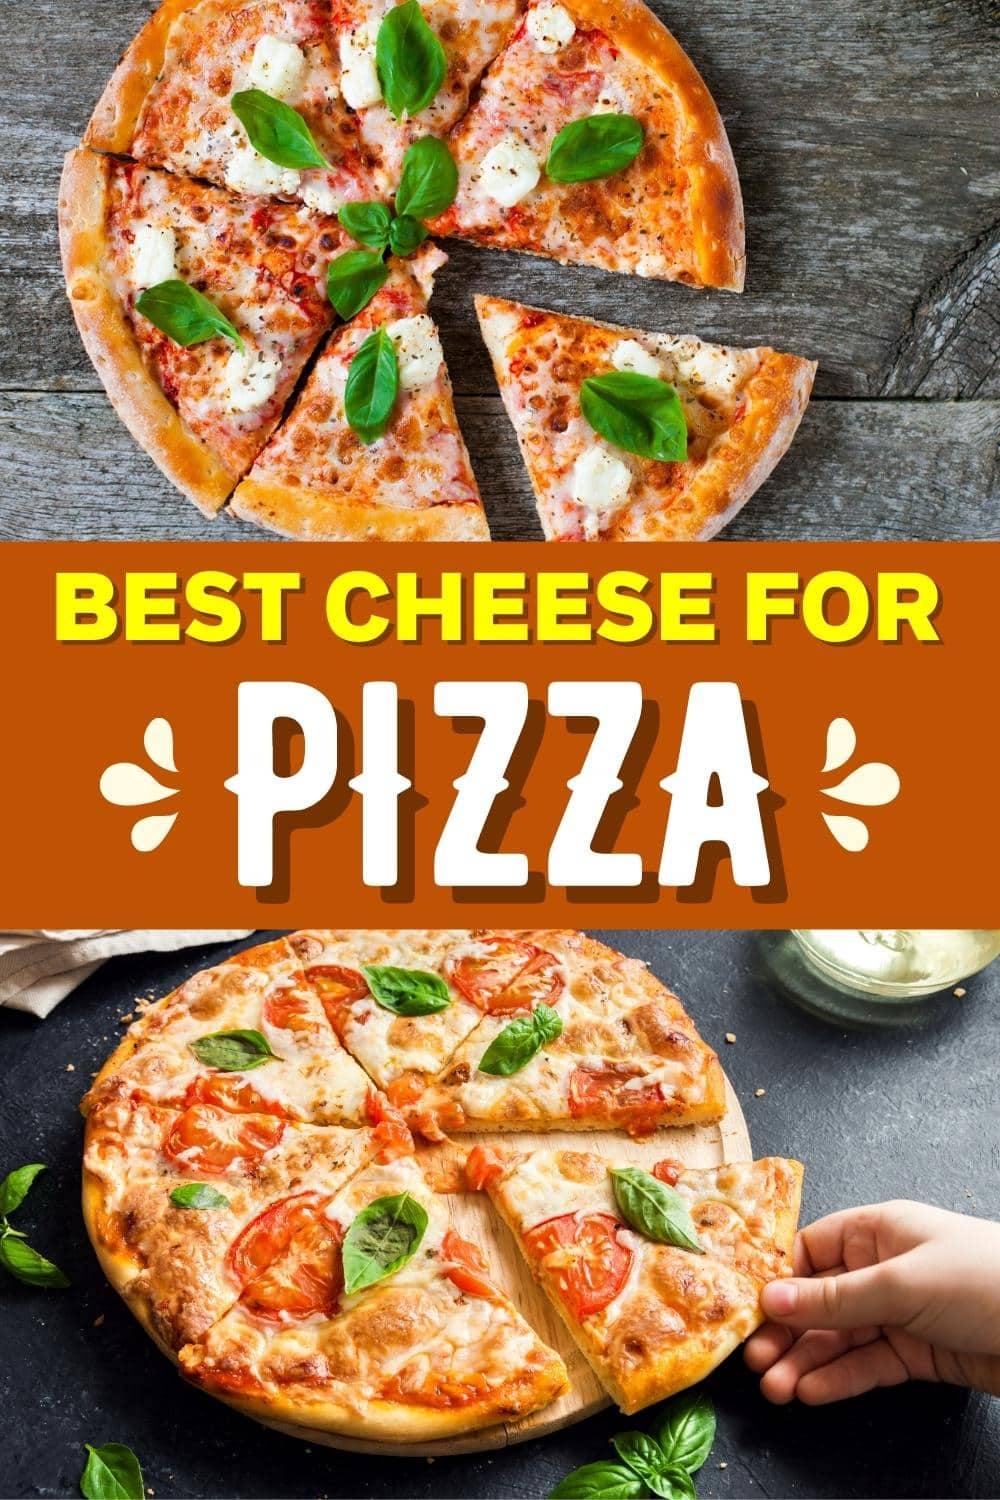 Best Cheese for Pizza (11 Perfect Types) - Insanely Good